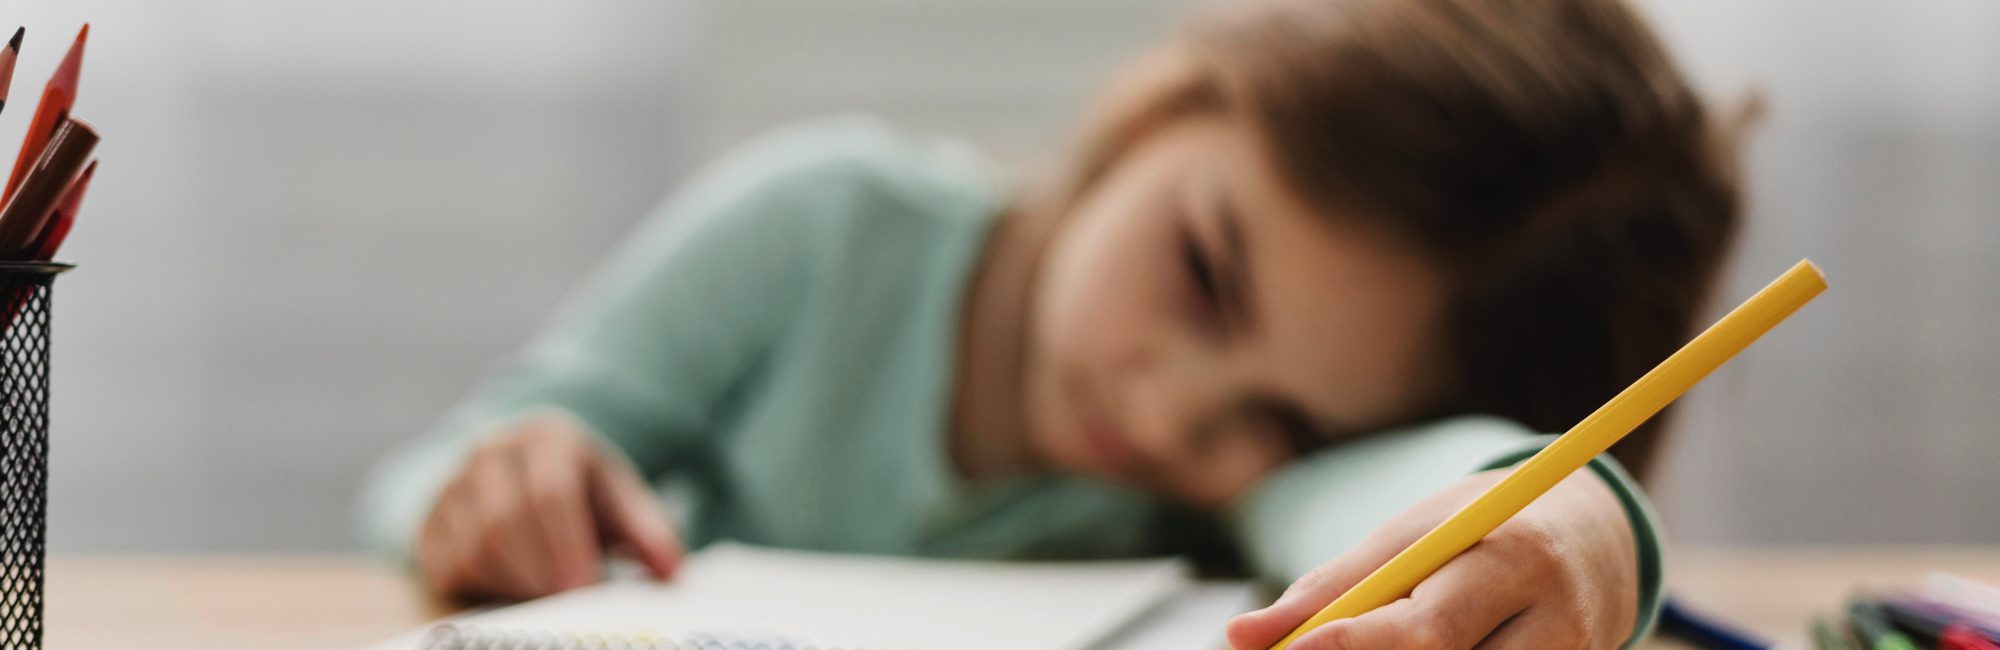 Sad girl resting head on desk with pencil in hand